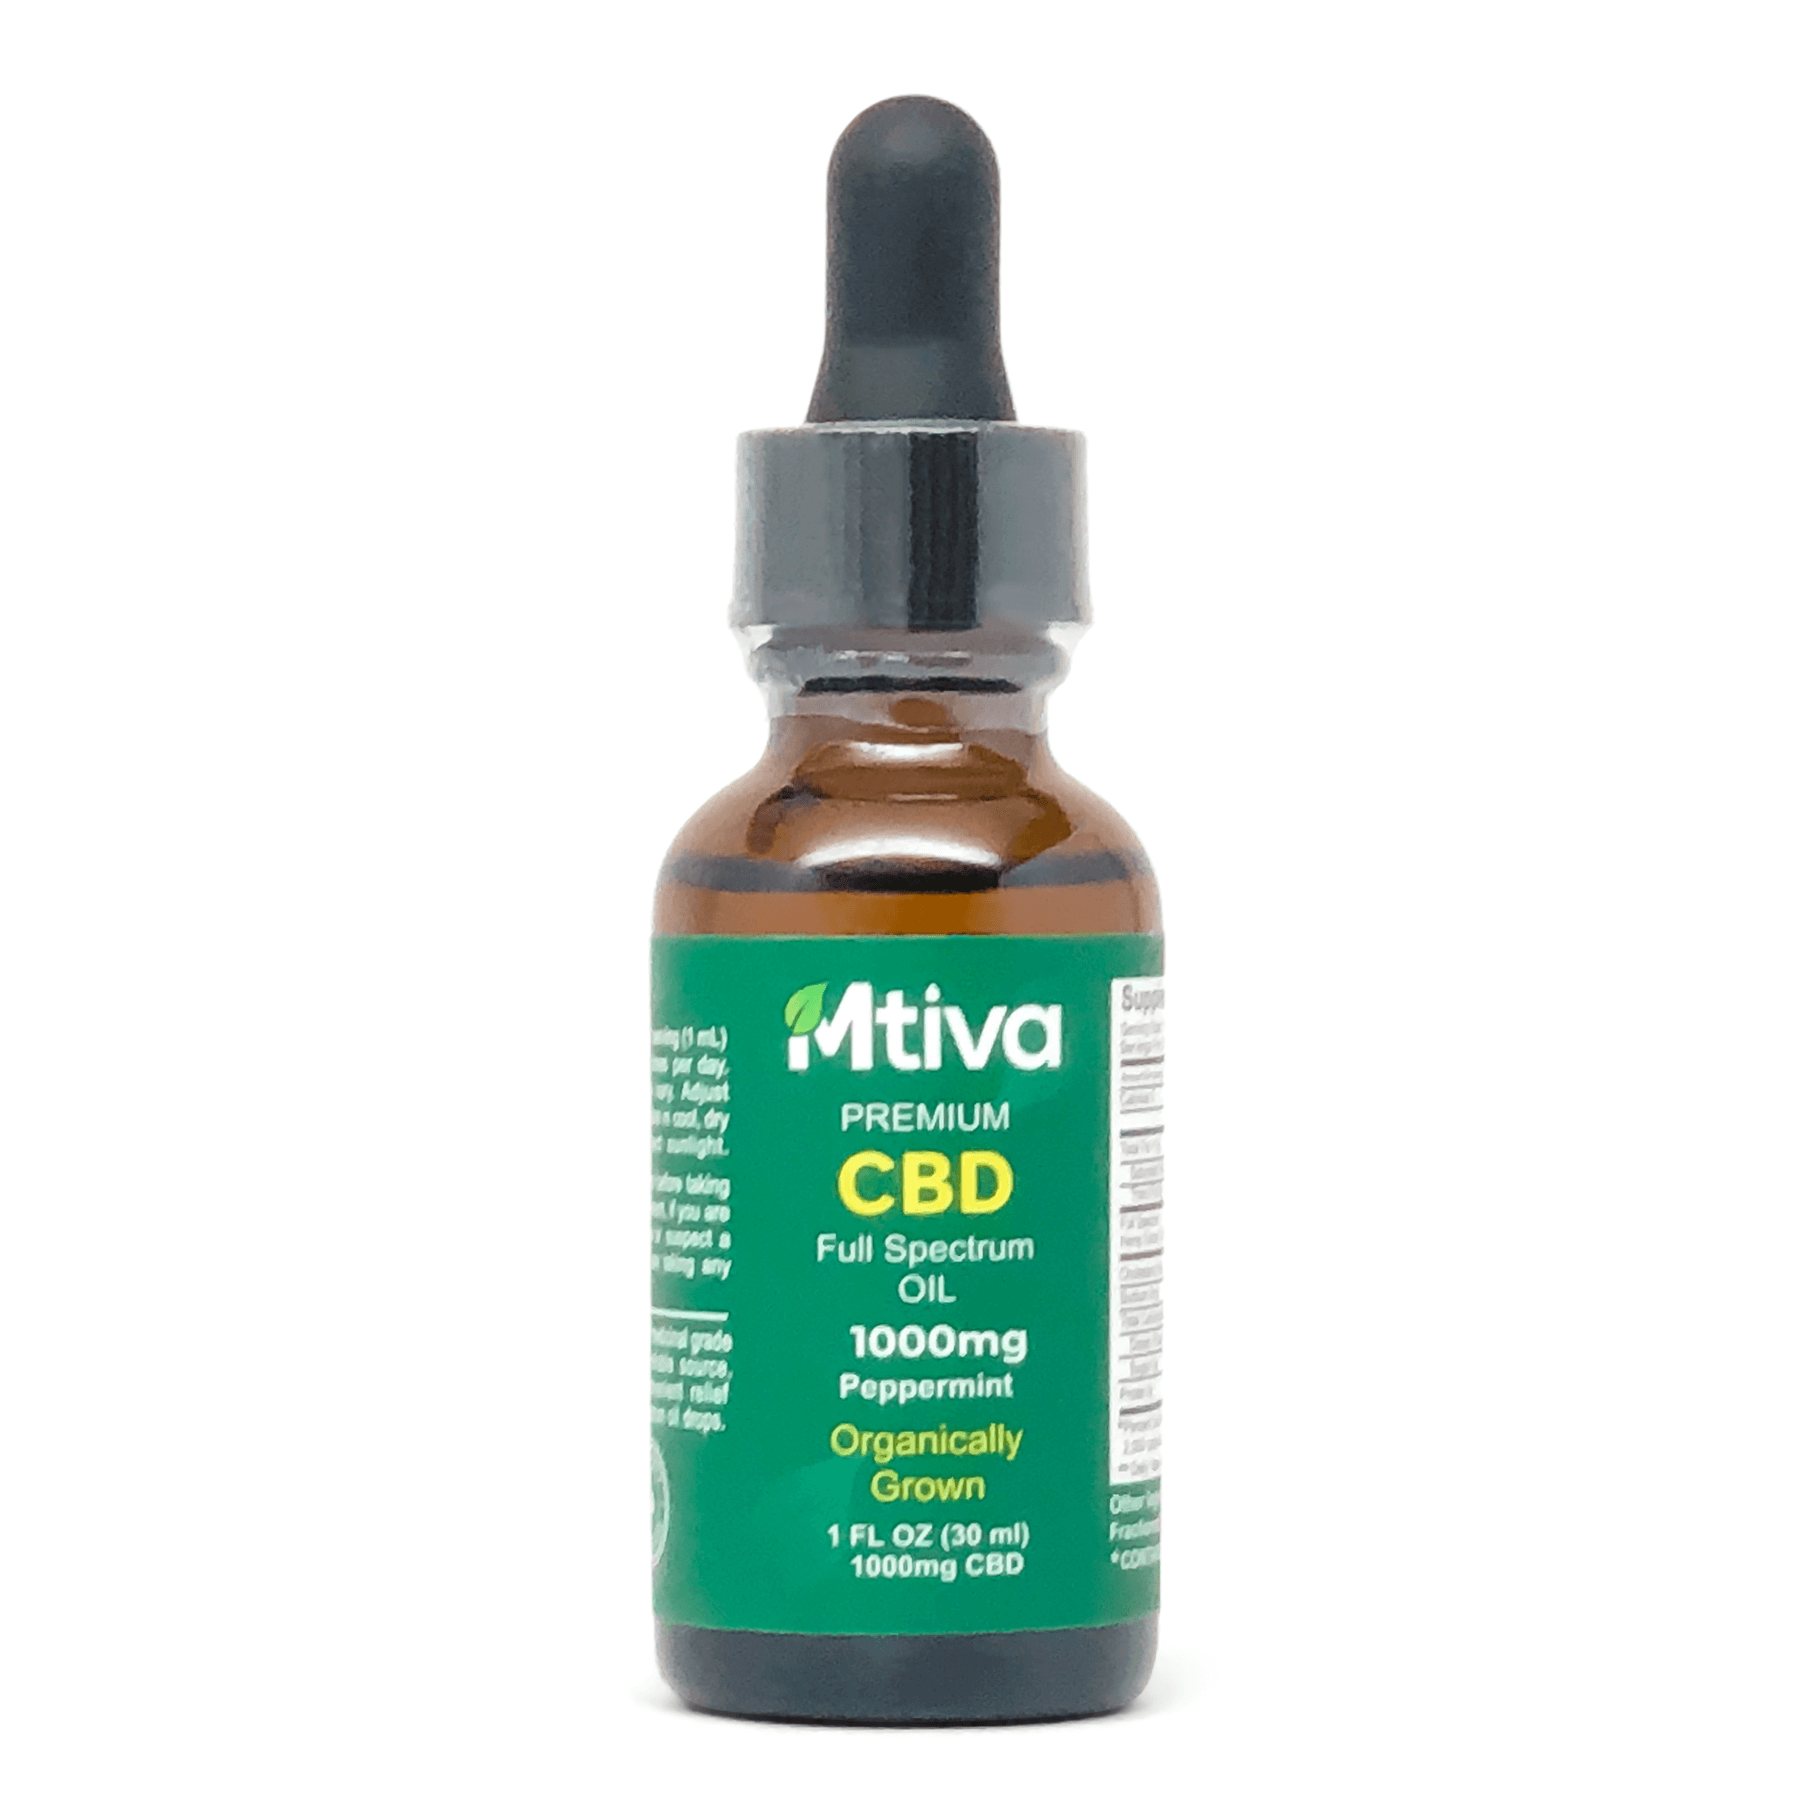 Buy  our peppermint flavored organic CBD Oil starting at $29.99.